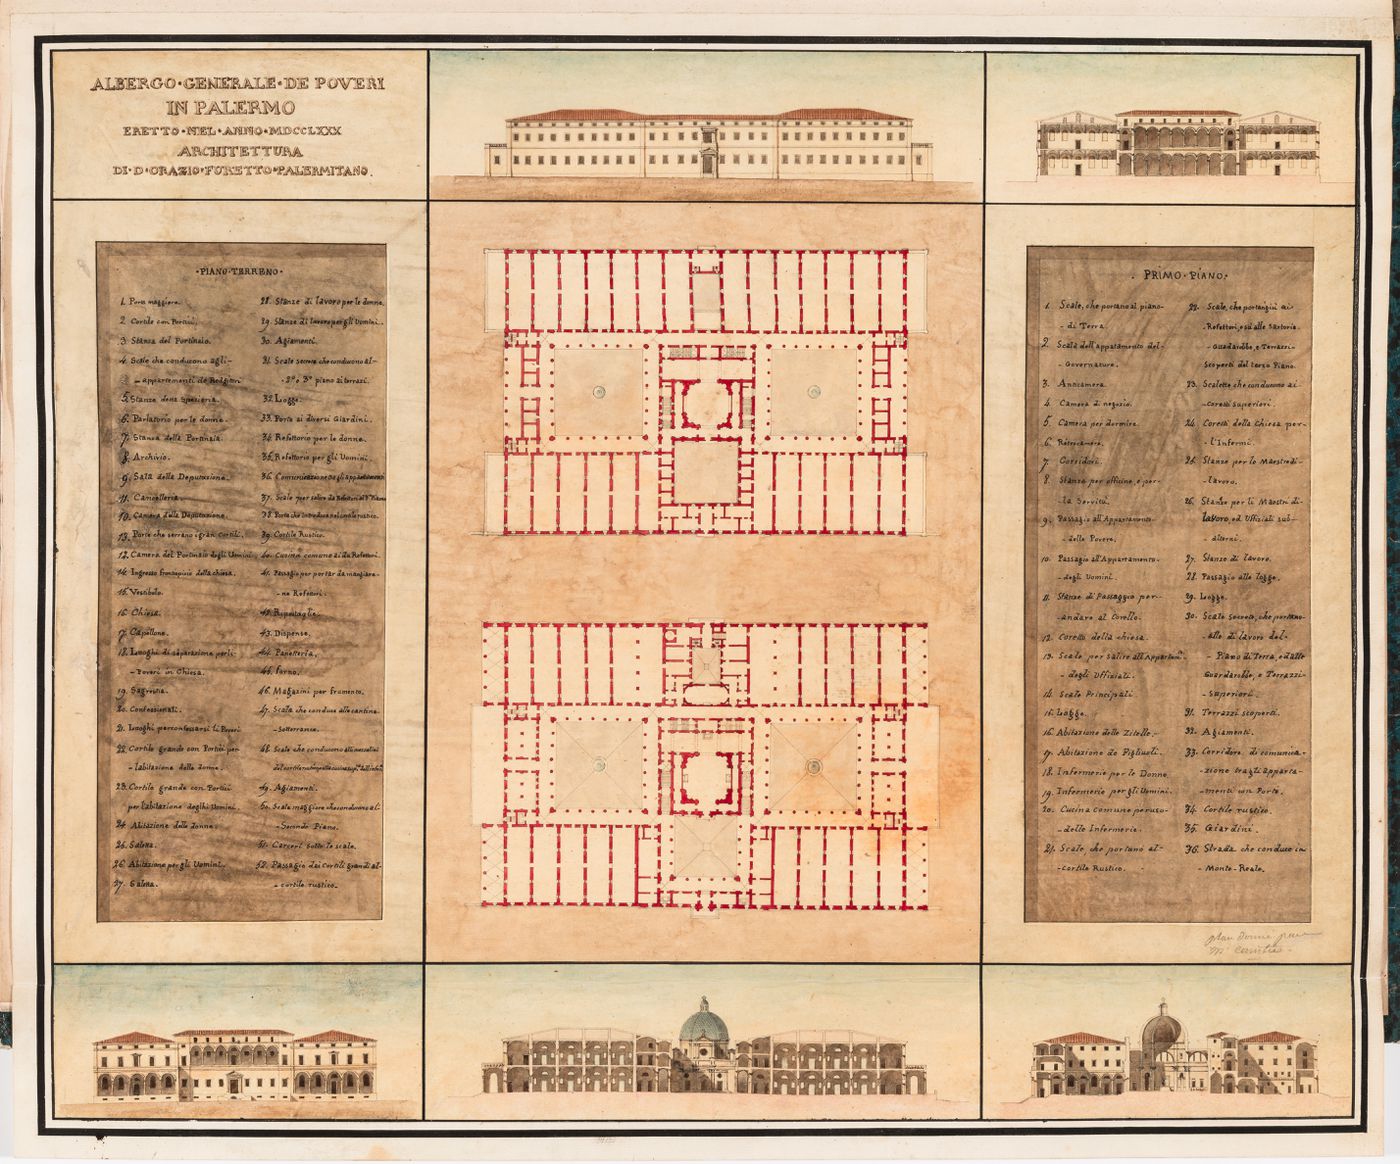 Albergo dei poveri, Palermo: Plans, sections and sectional elevations